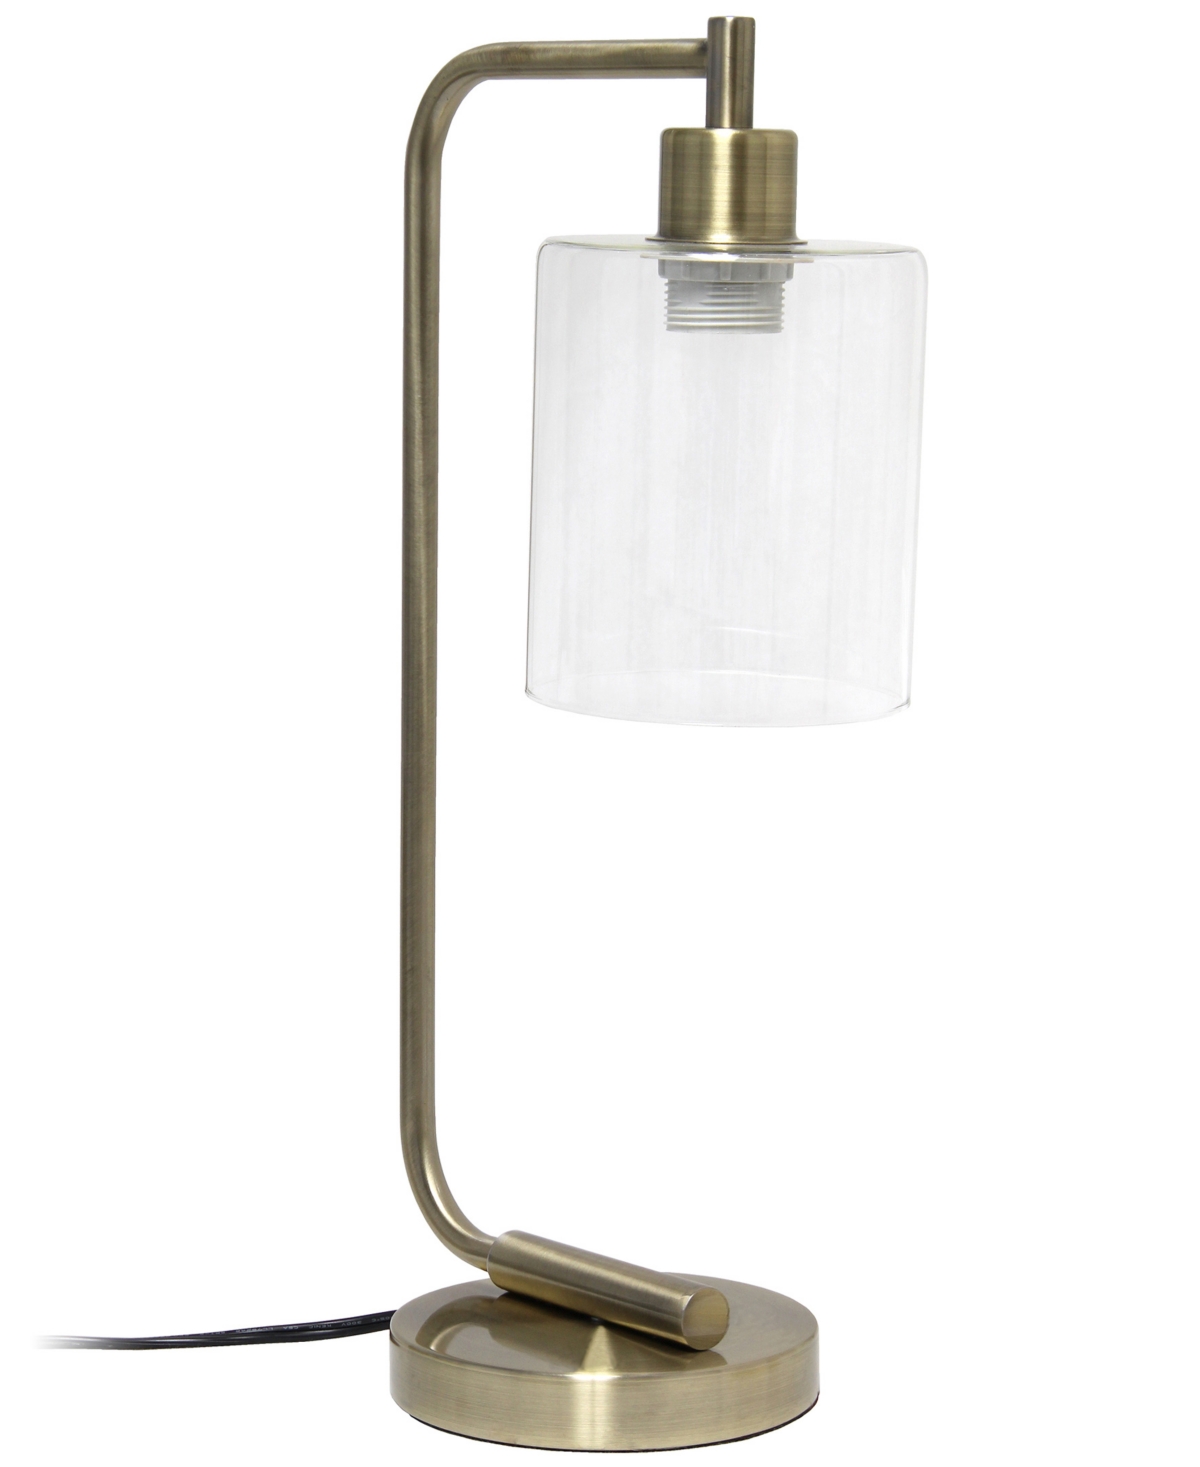 Shop Lalia Home Modern Iron Desk Lamp With Glass Shade, Antique Brass